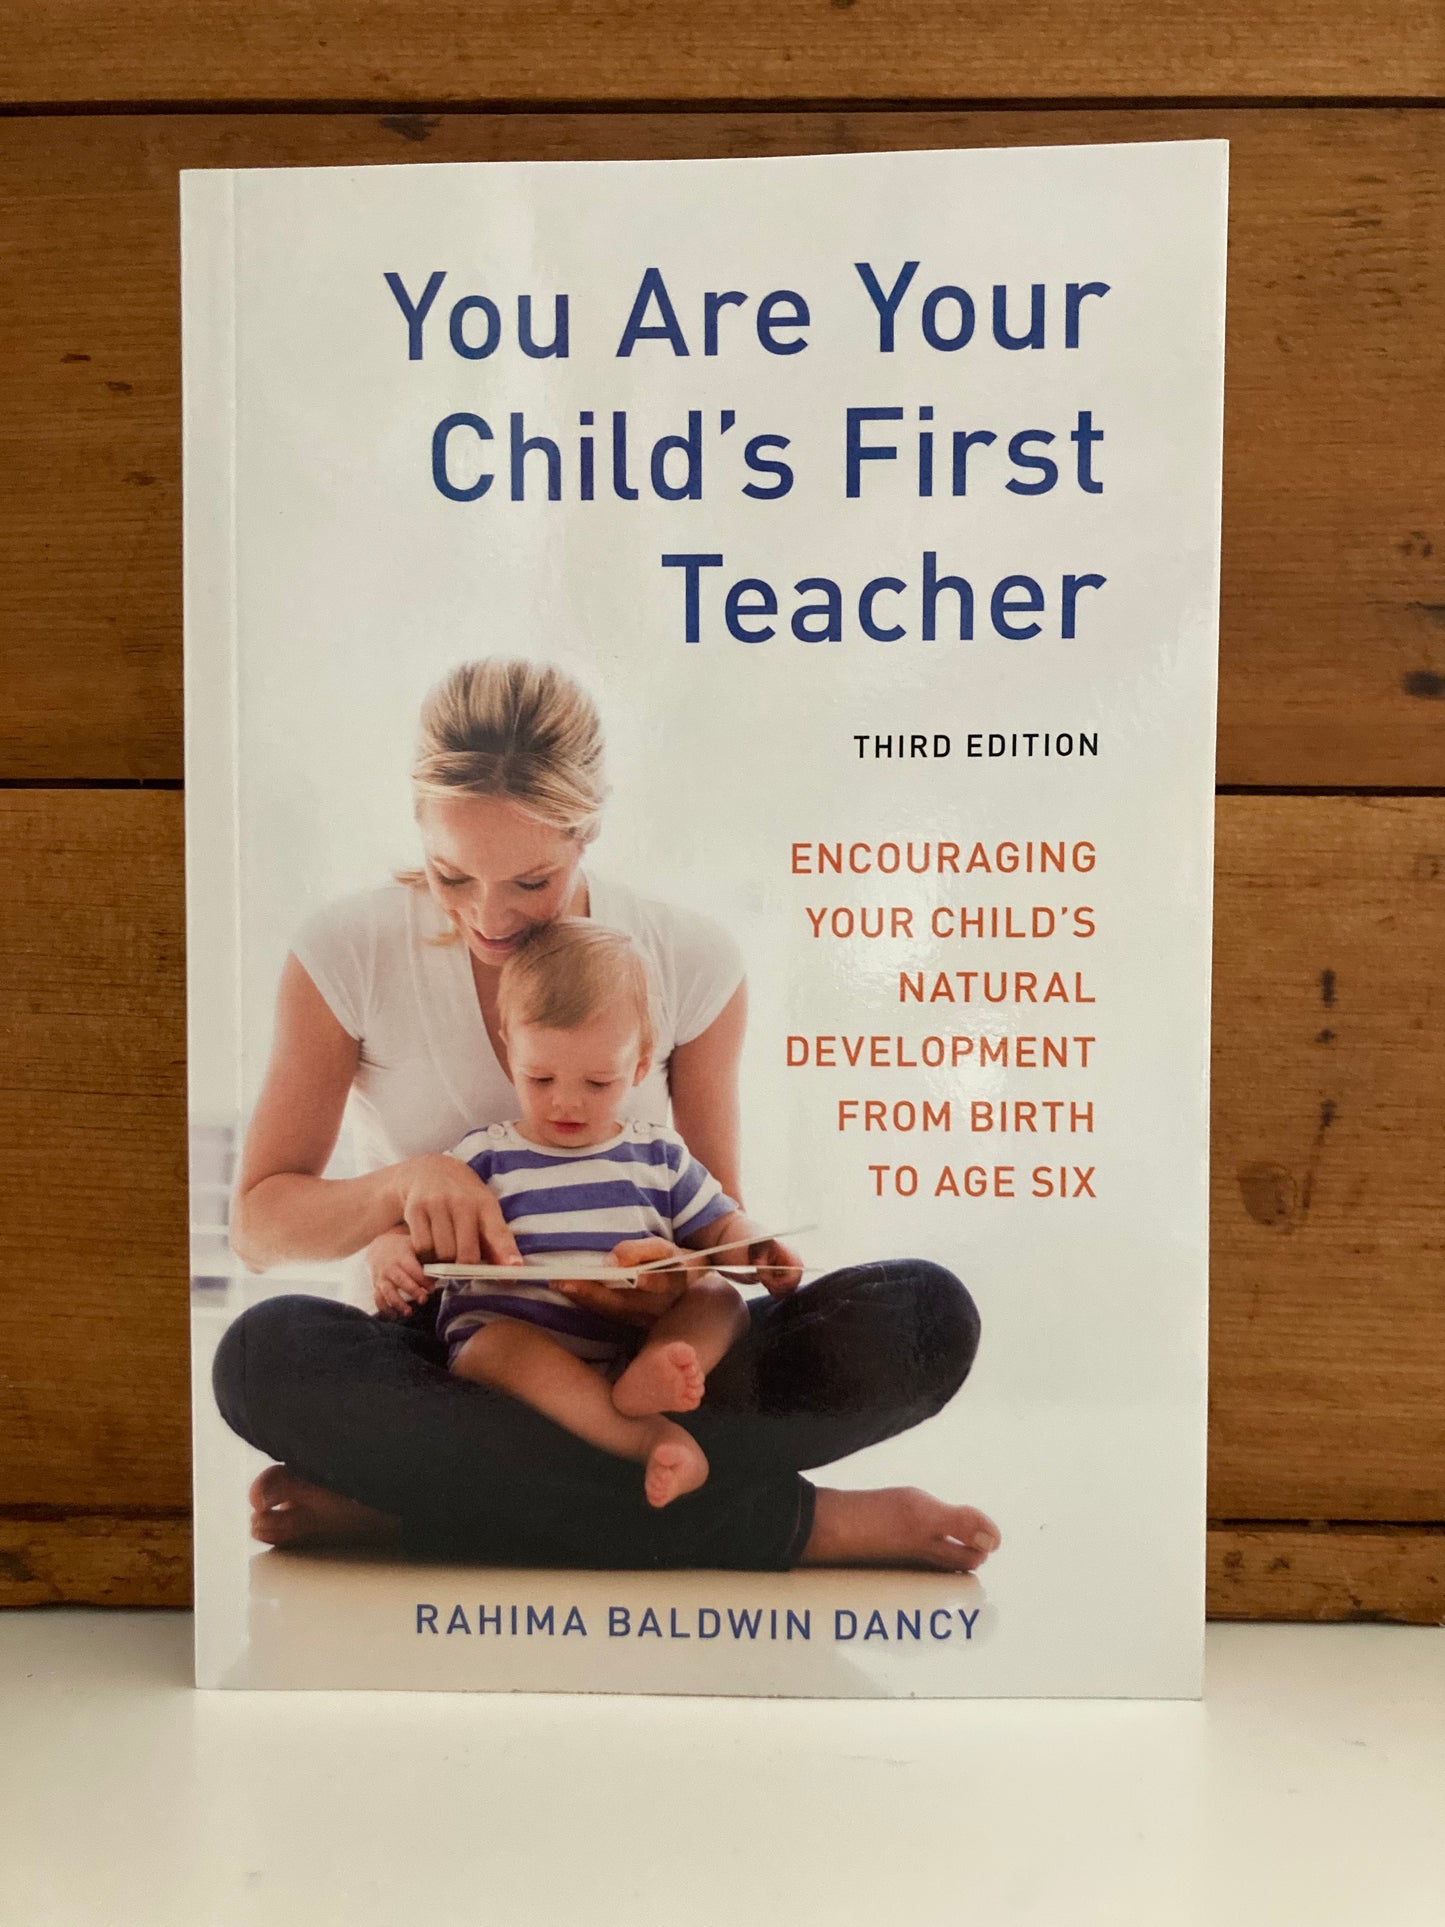 Parenting Resource Book - YOU ARE YOUR CHILD'S FIRST TEACHER